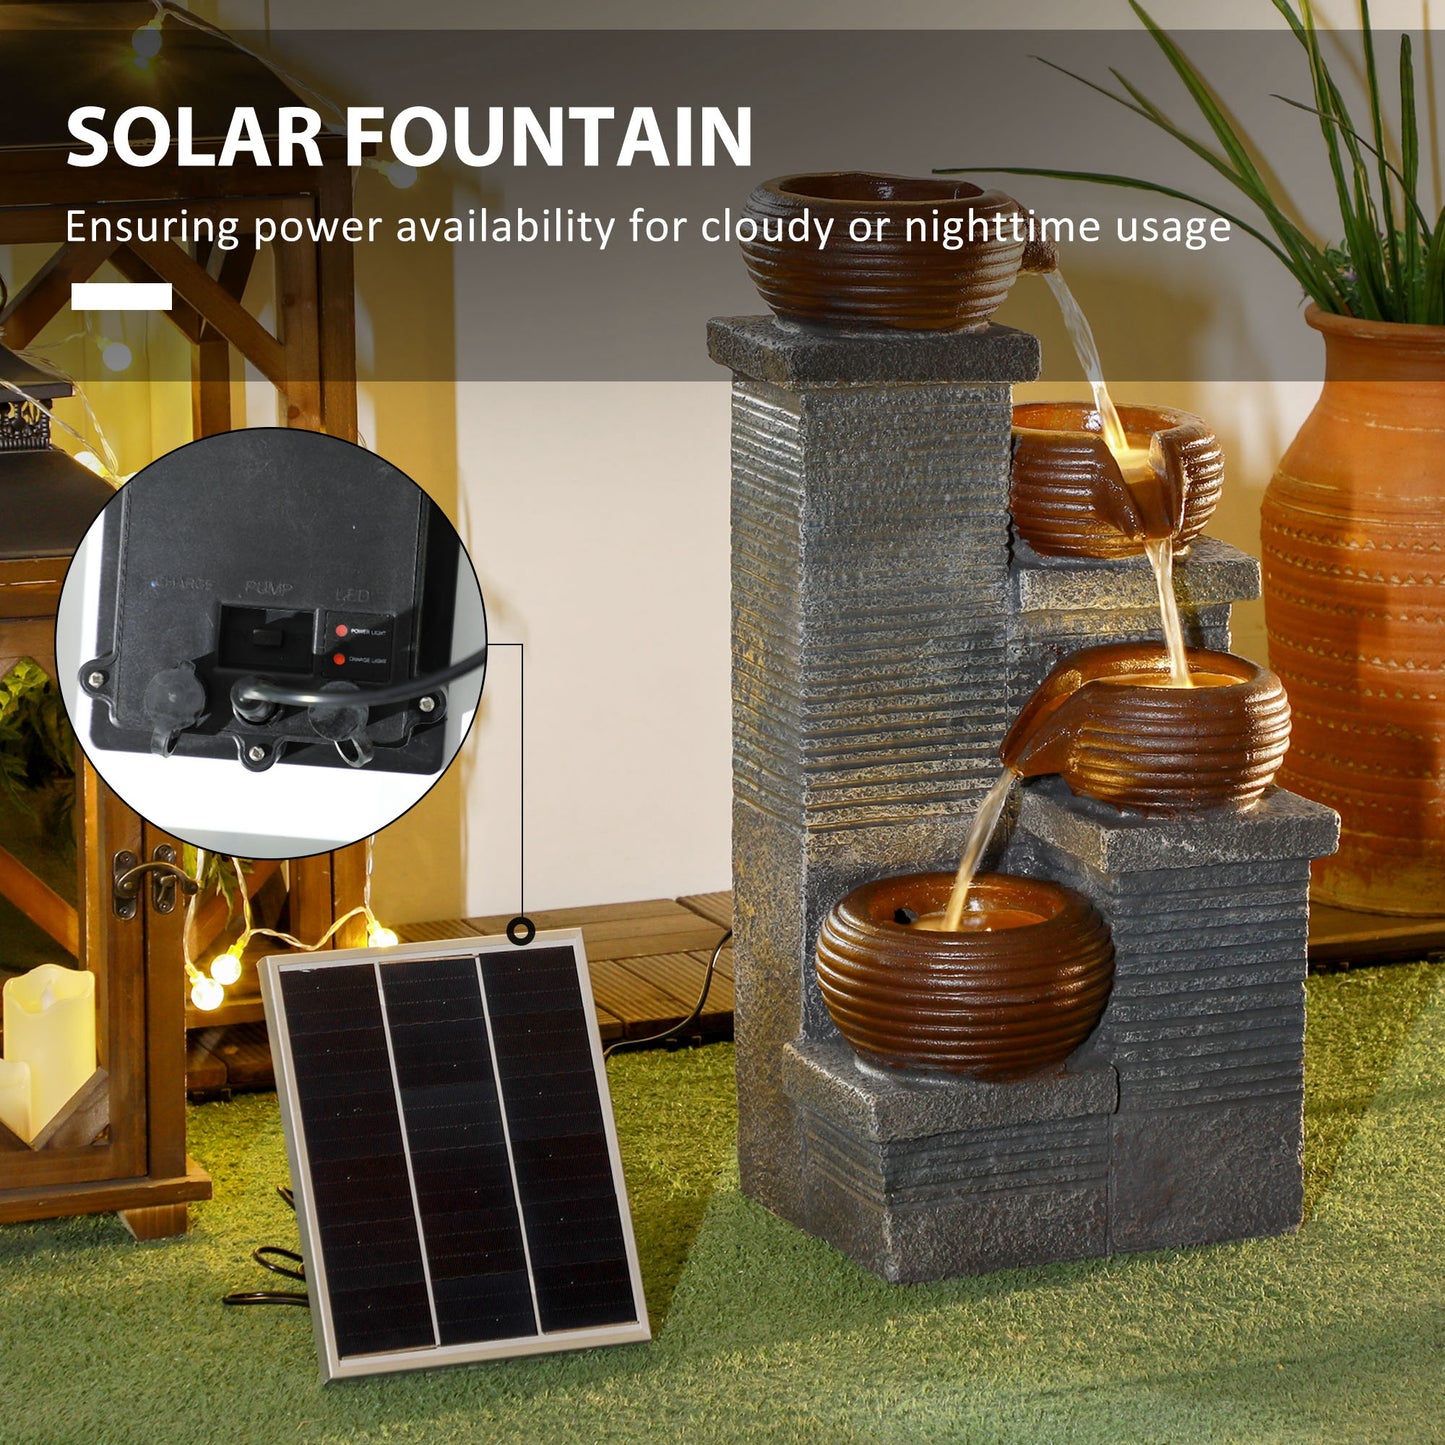 Outsunny Solar Powered Garden Water Feature with LED Lights and Pump, 4 Tier Cascading Water Fountain for Indoor/Outdoor, Bowls Waterfall Ornament, 58cm Height